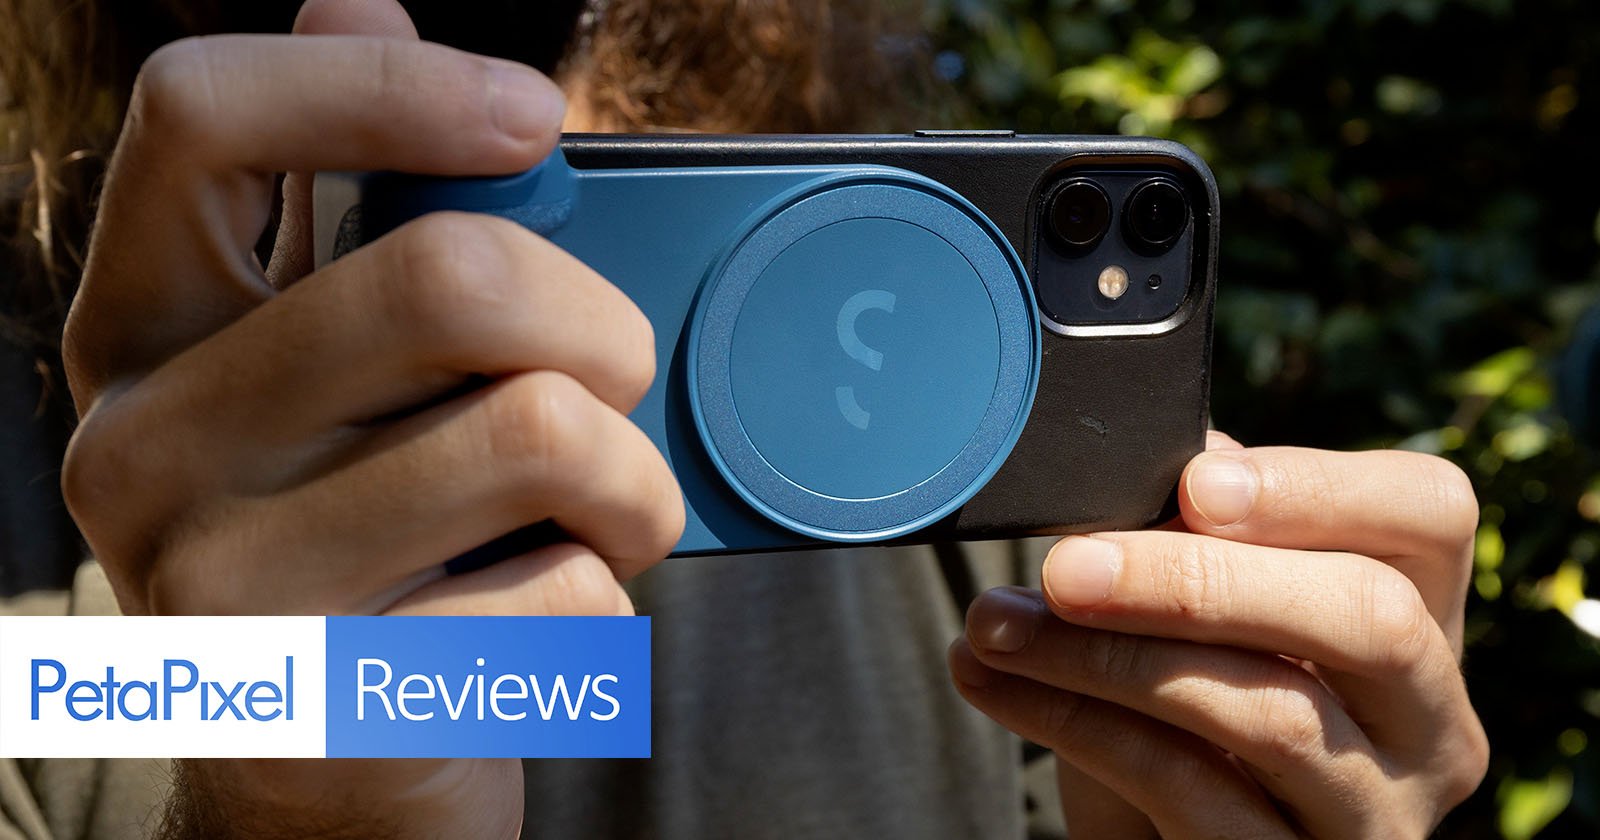 Shiftcam add-on lens cases are now available for Apple's iPhone 11 models:  Digital Photography Review